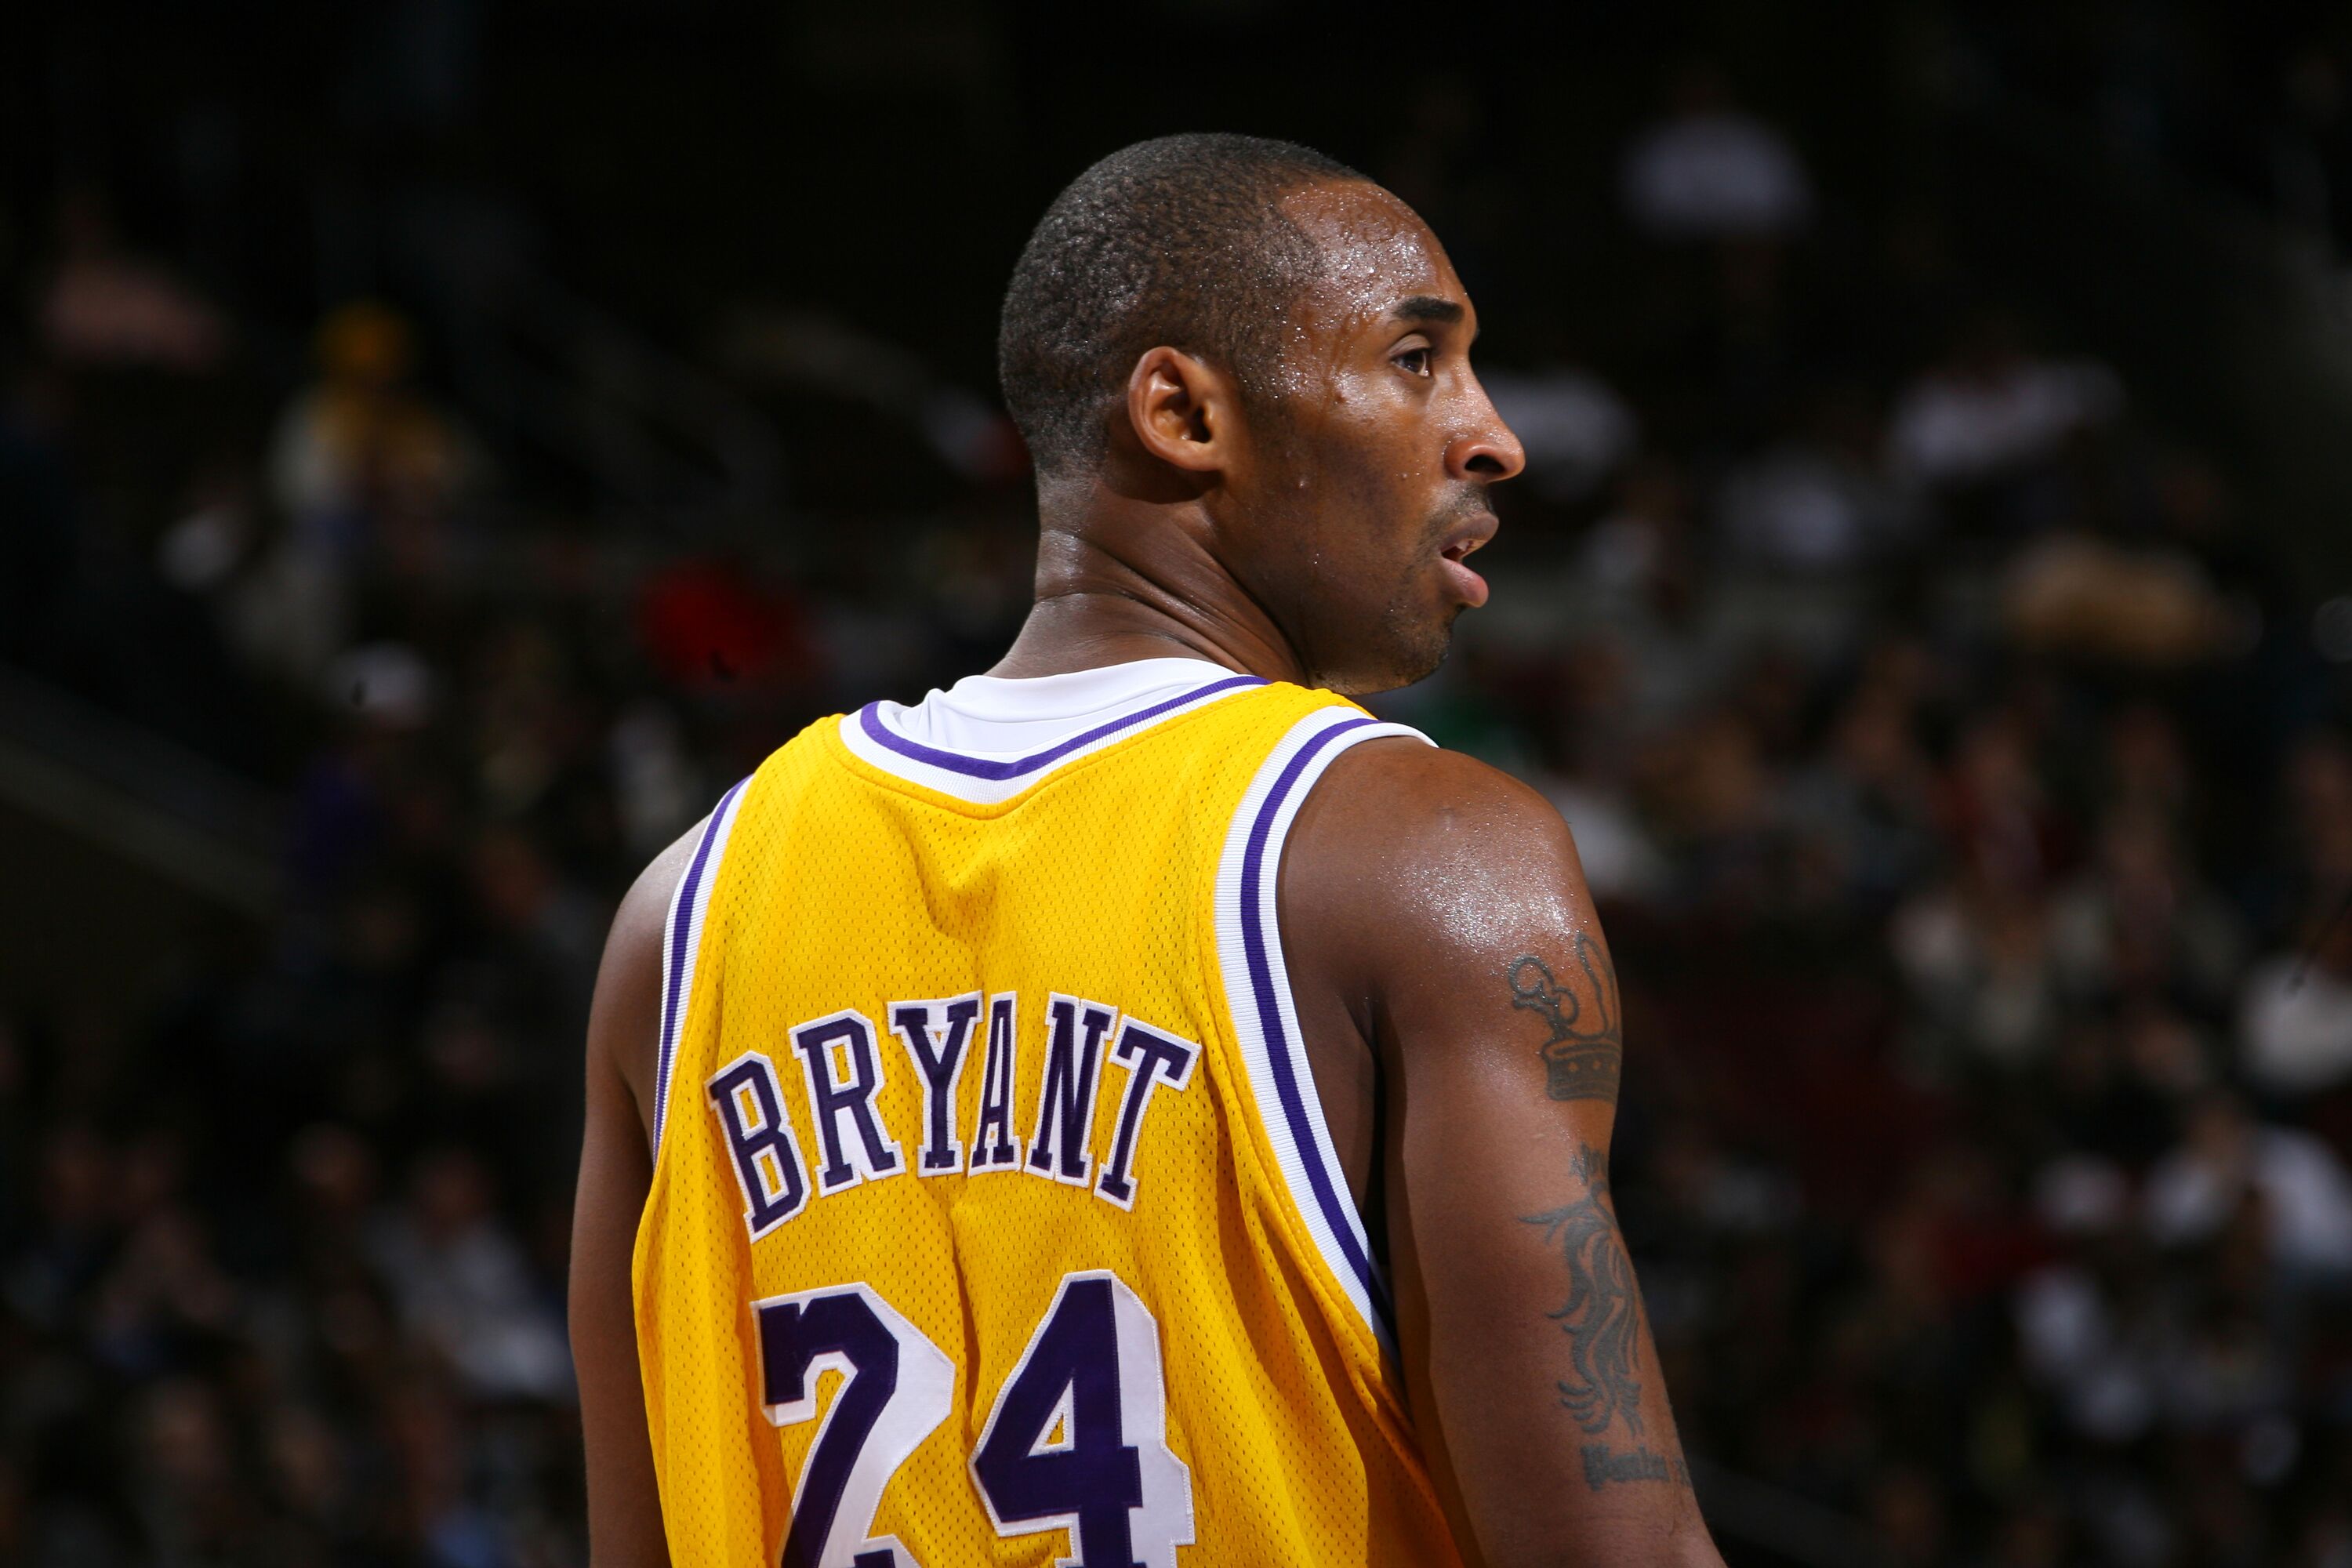 A portrait of Kobe Bryant at an NBA game | Source: Getty Images/GlobalImagesUkraine